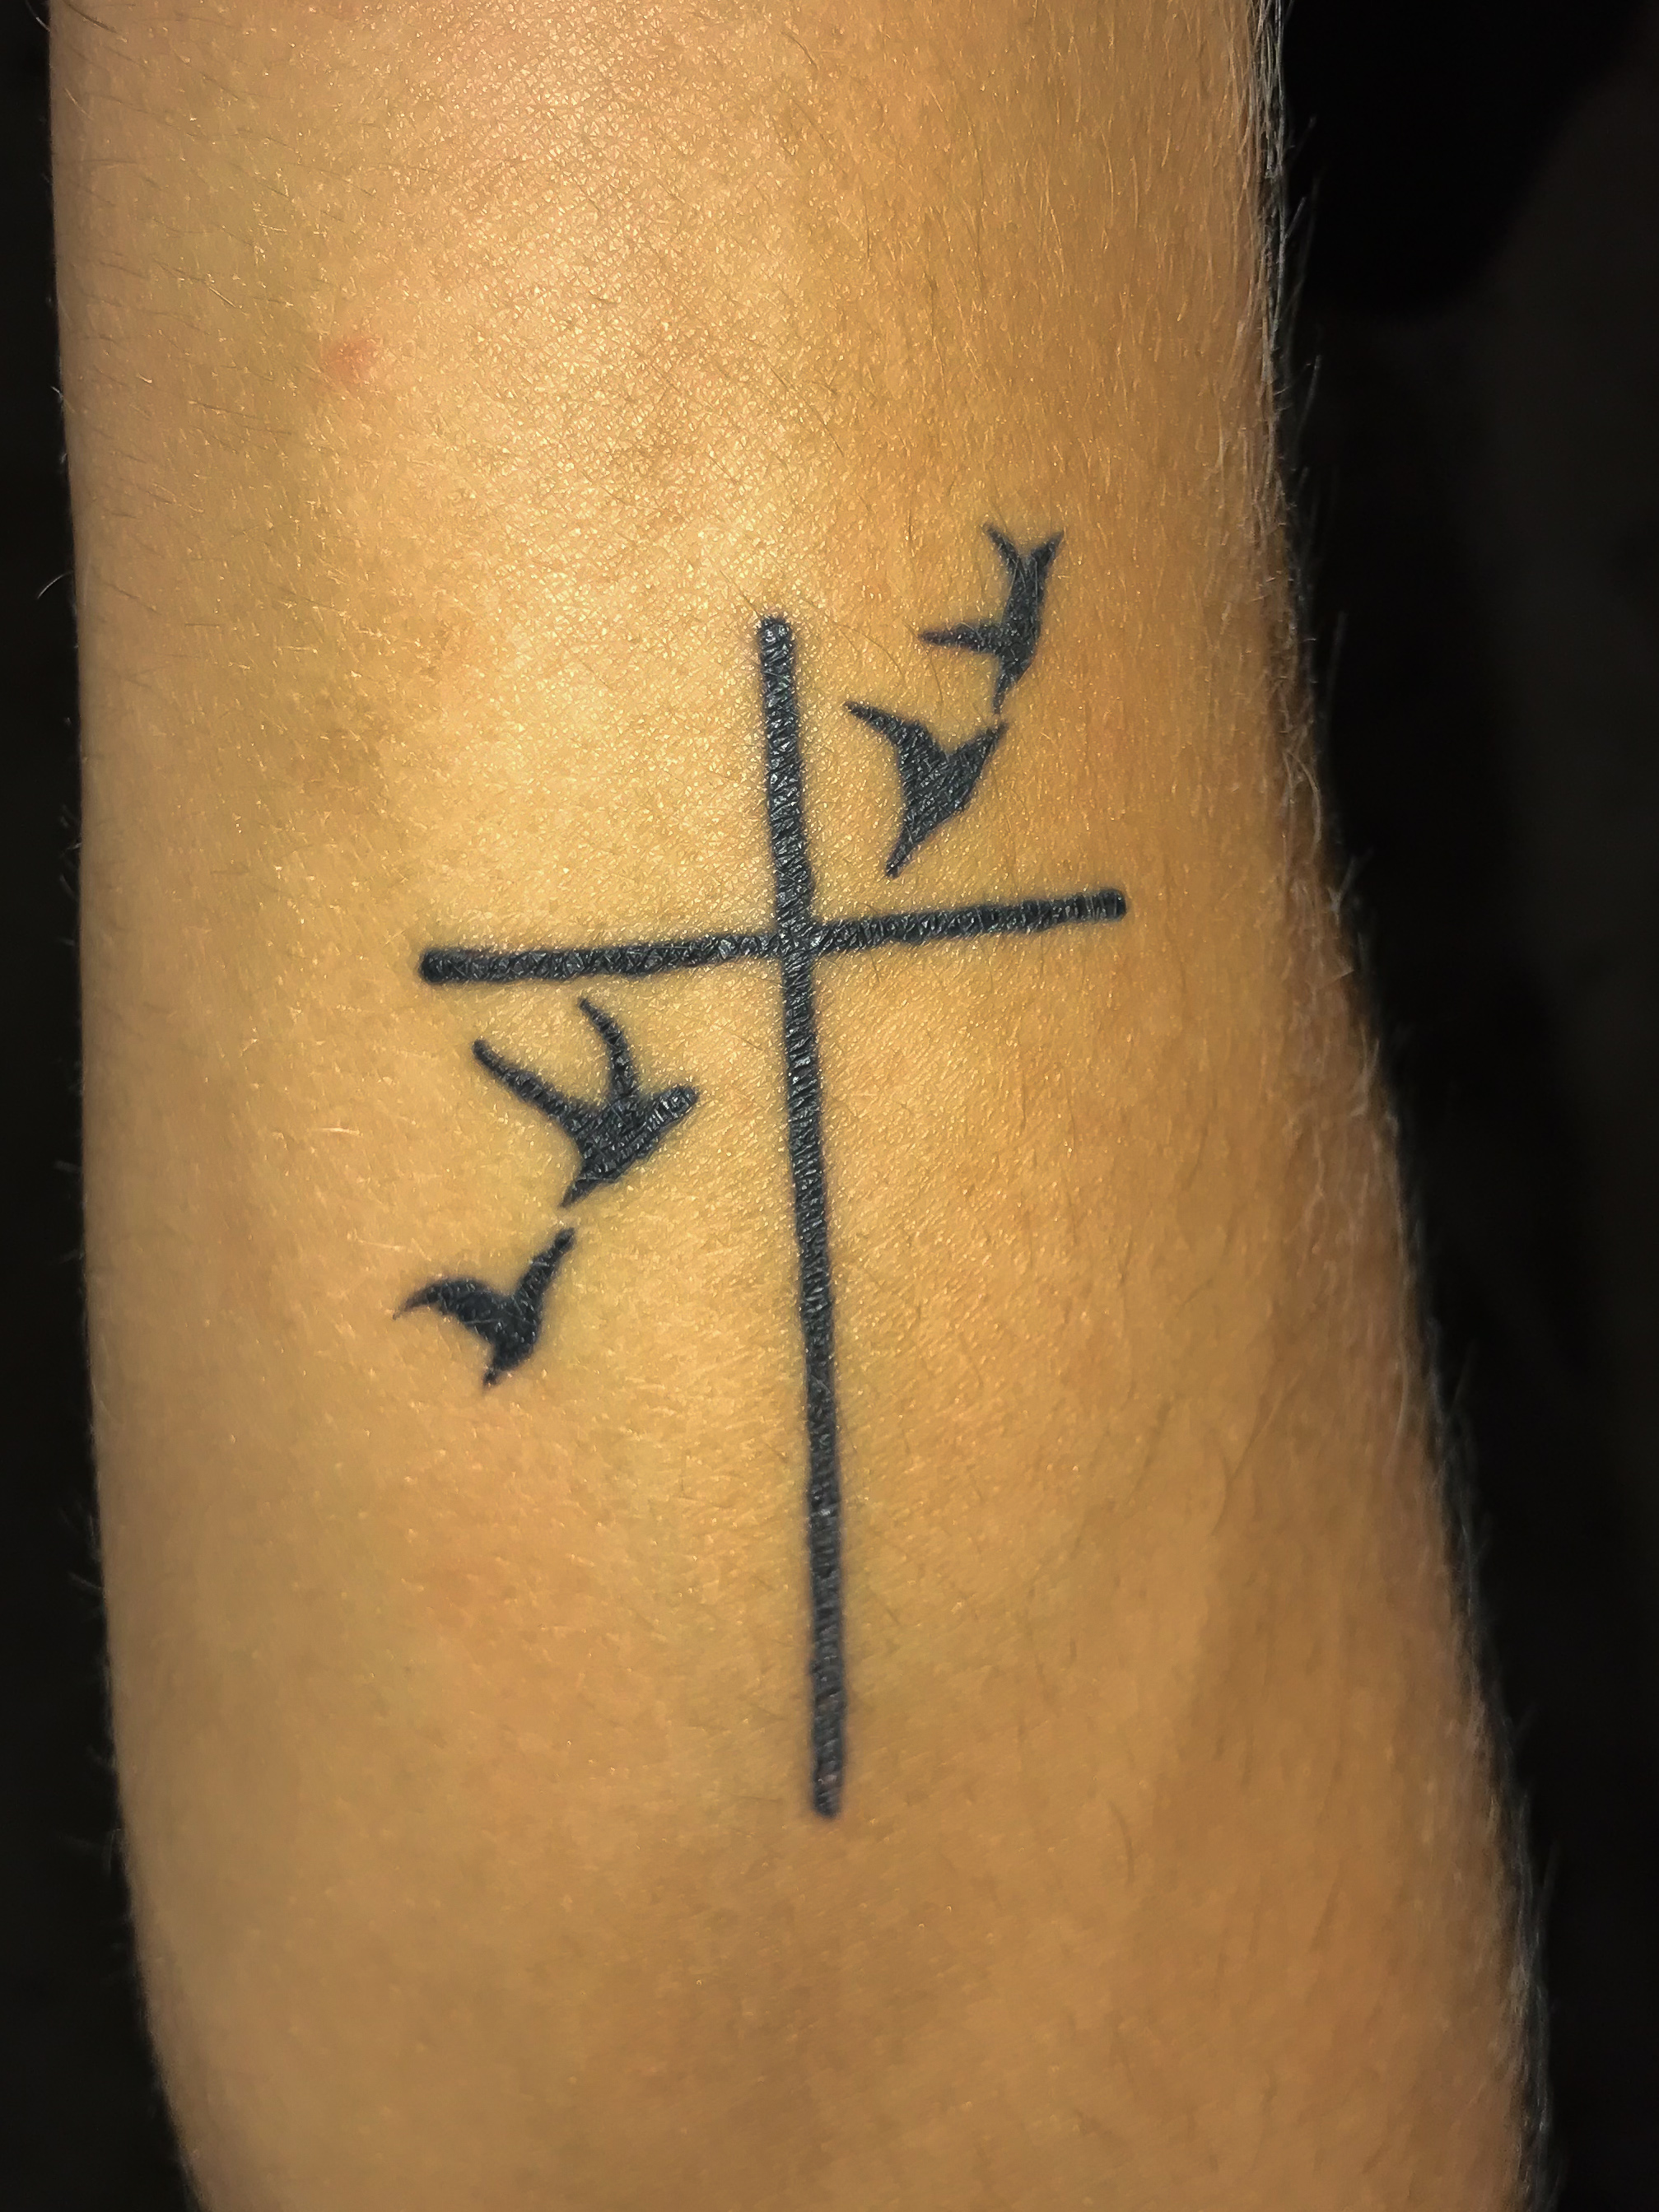 This is Jacob Holcombe. Holcombe got this tattoo before he moved to North Greenville to symbolize his faith, but to not show it off. Holcombe wants people to know that he is a Christian and he is someone to talk to about Christianity.